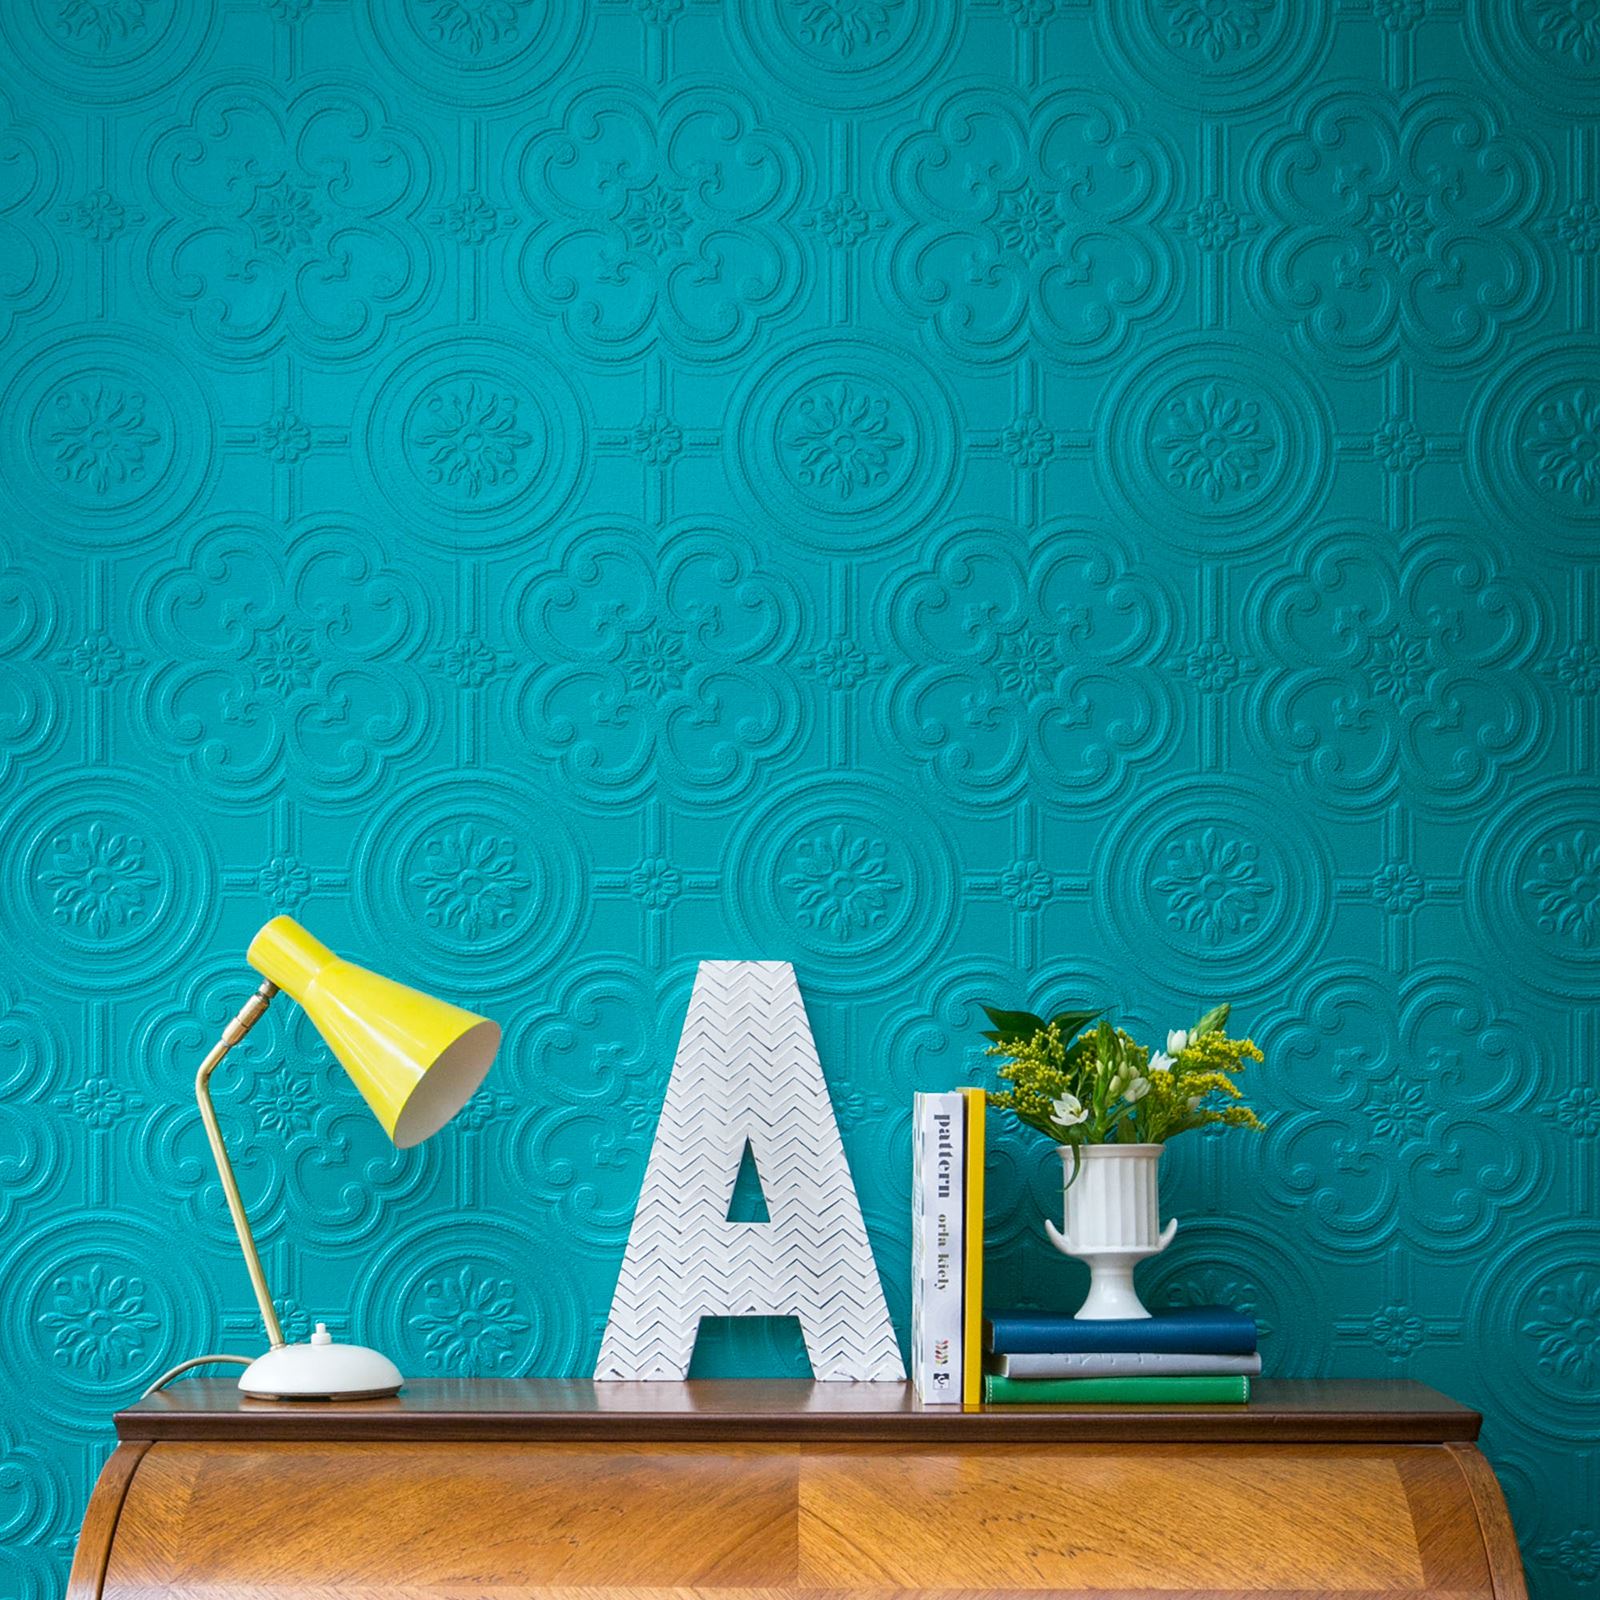 paintable wallpaper,green,wallpaper,turquoise,teal,yellow